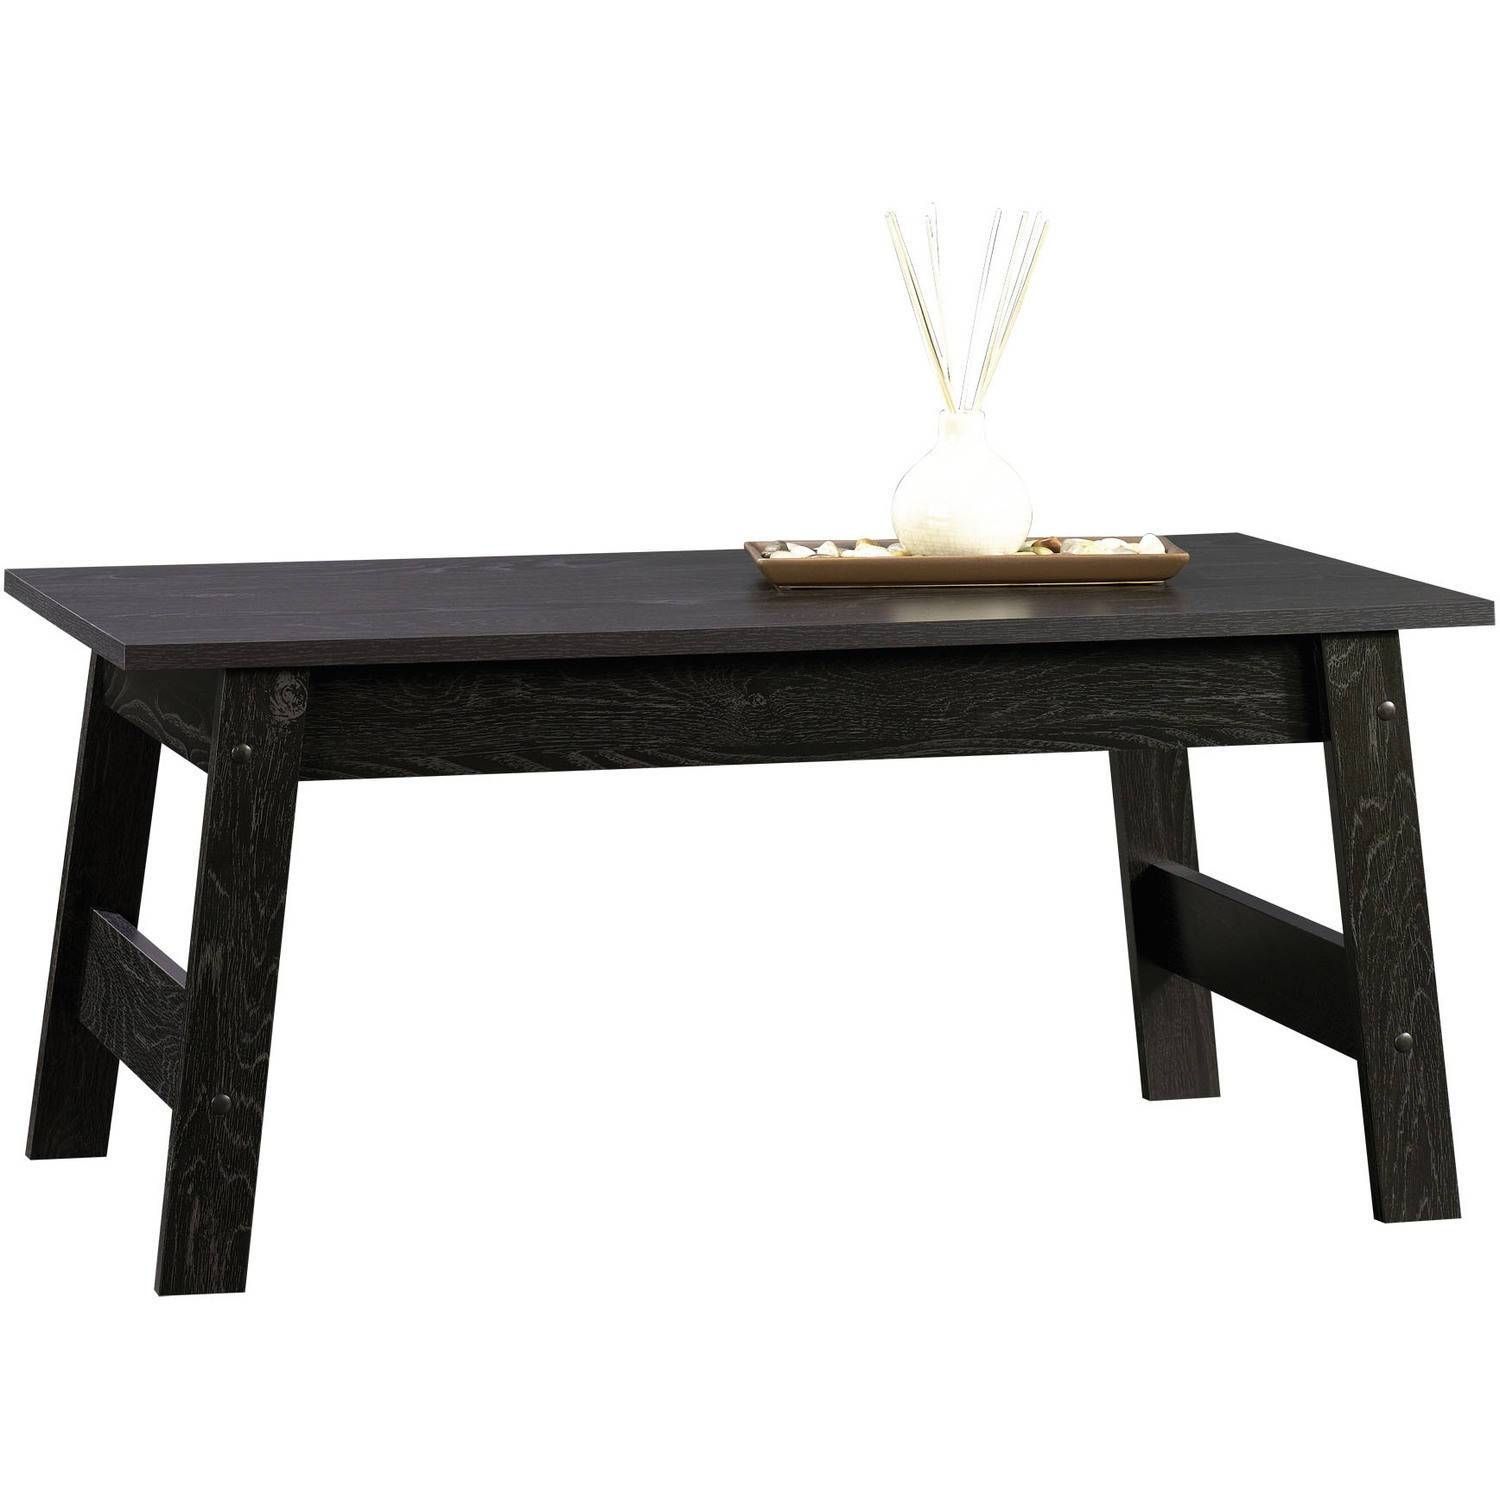 Sauder Beginnings Collection Coffee Table, Black – Walmart In Black Coffee Tables (View 5 of 30)